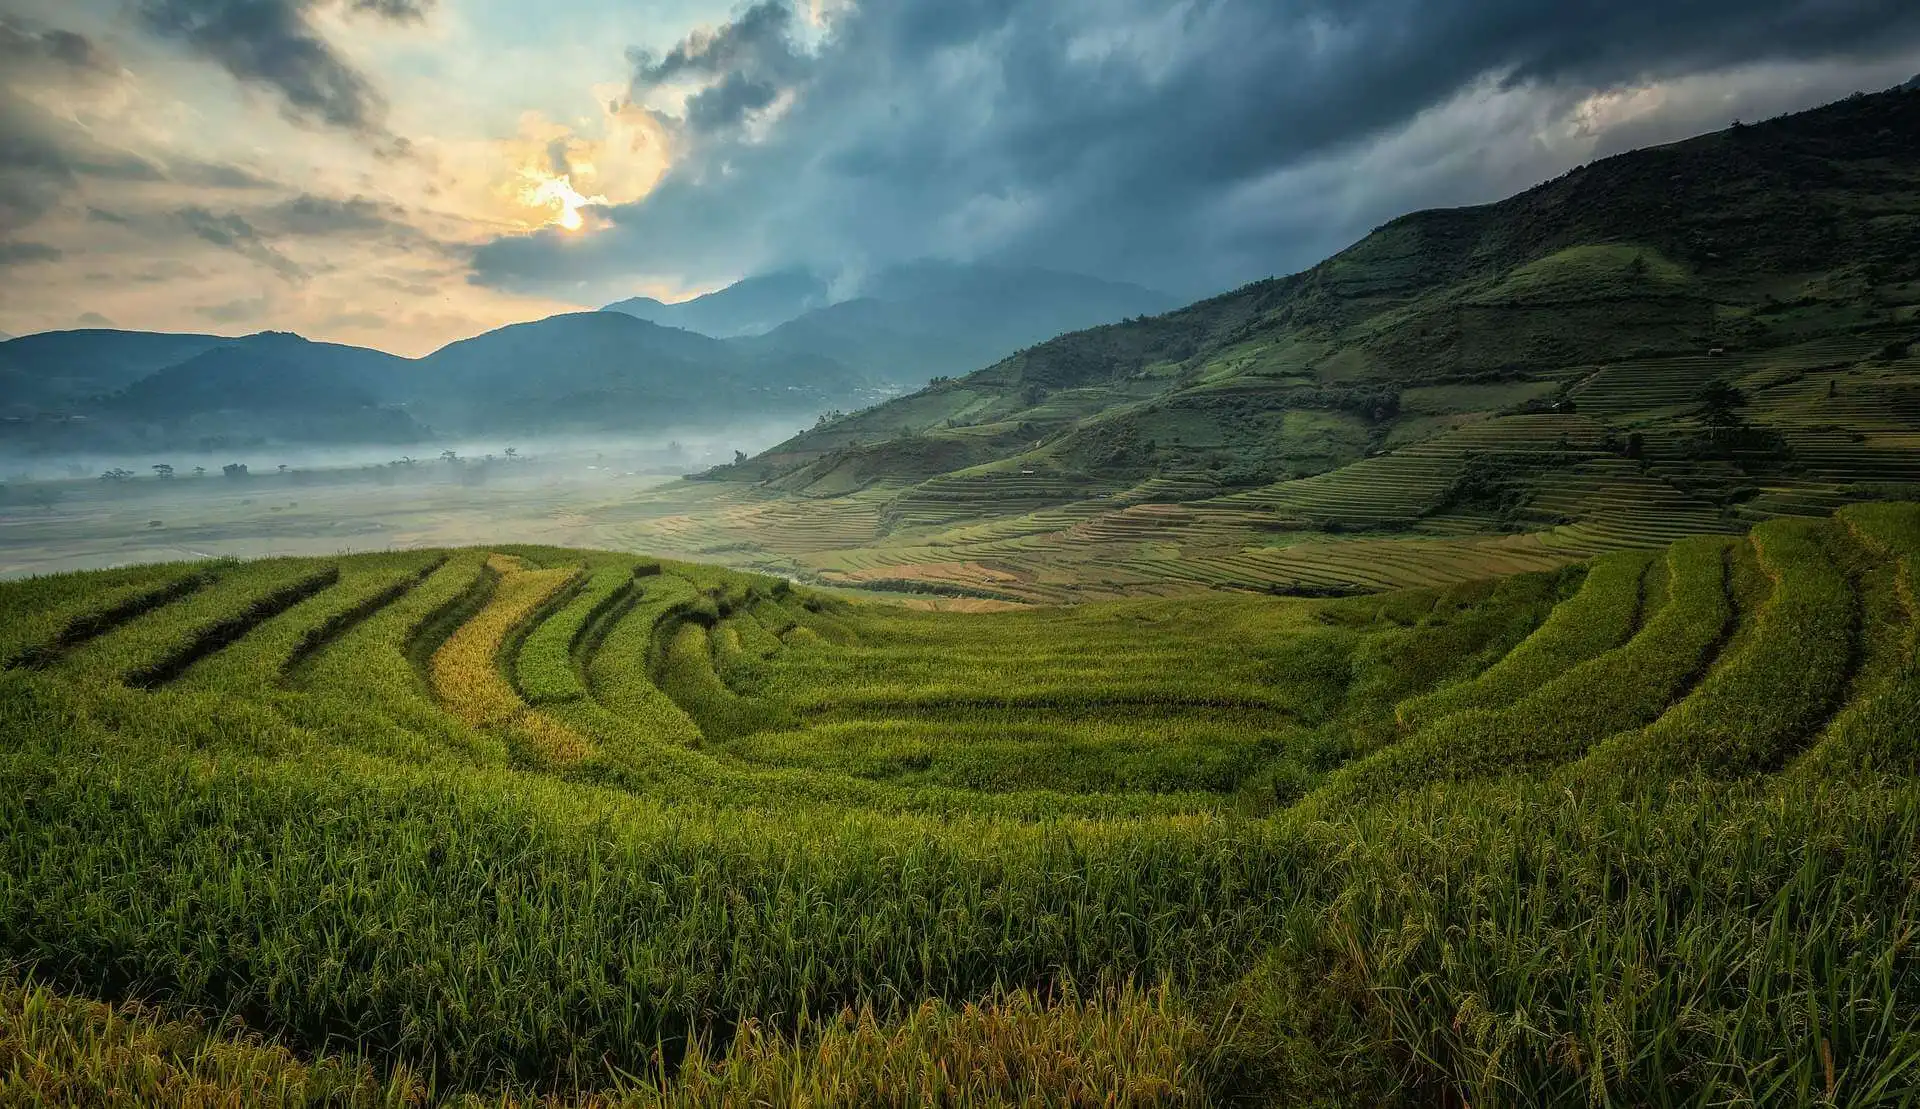 Picture of the rice paddies in Vietnam